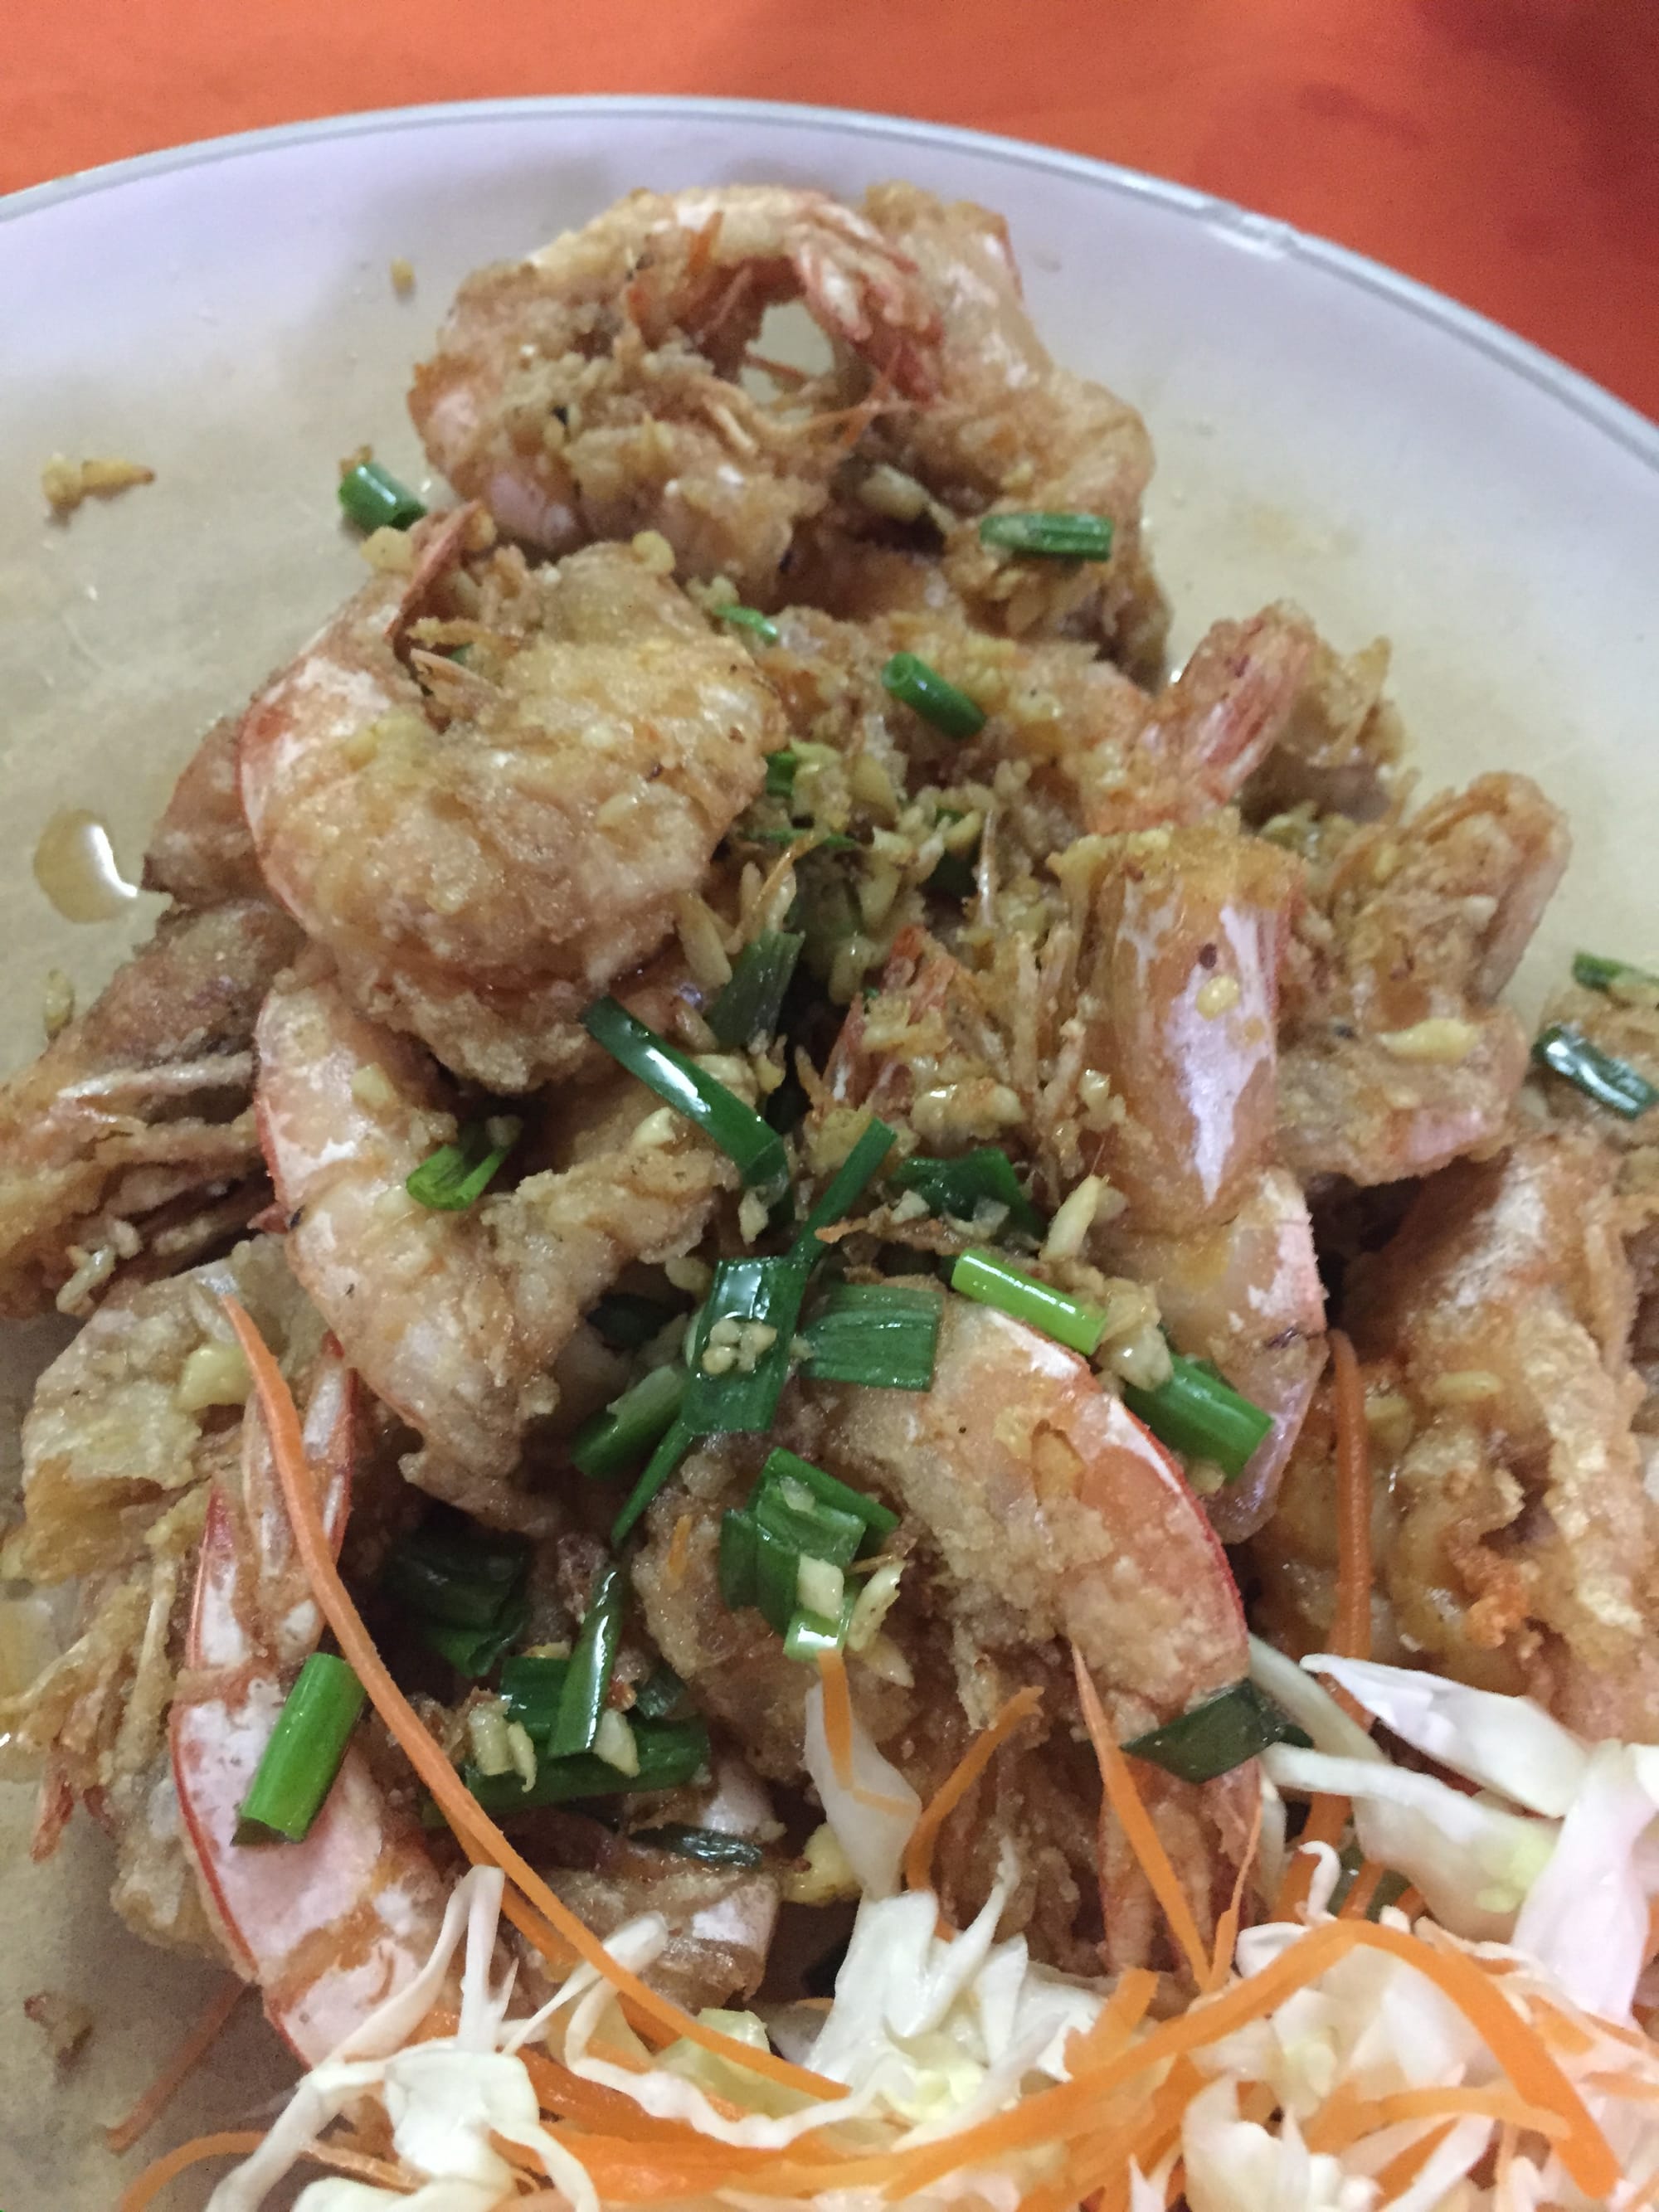 Photo by Author — my cooked salt and pepper shrimp at the Topspot Food Court, 93000 Kuching, Sarawak, Malaysia